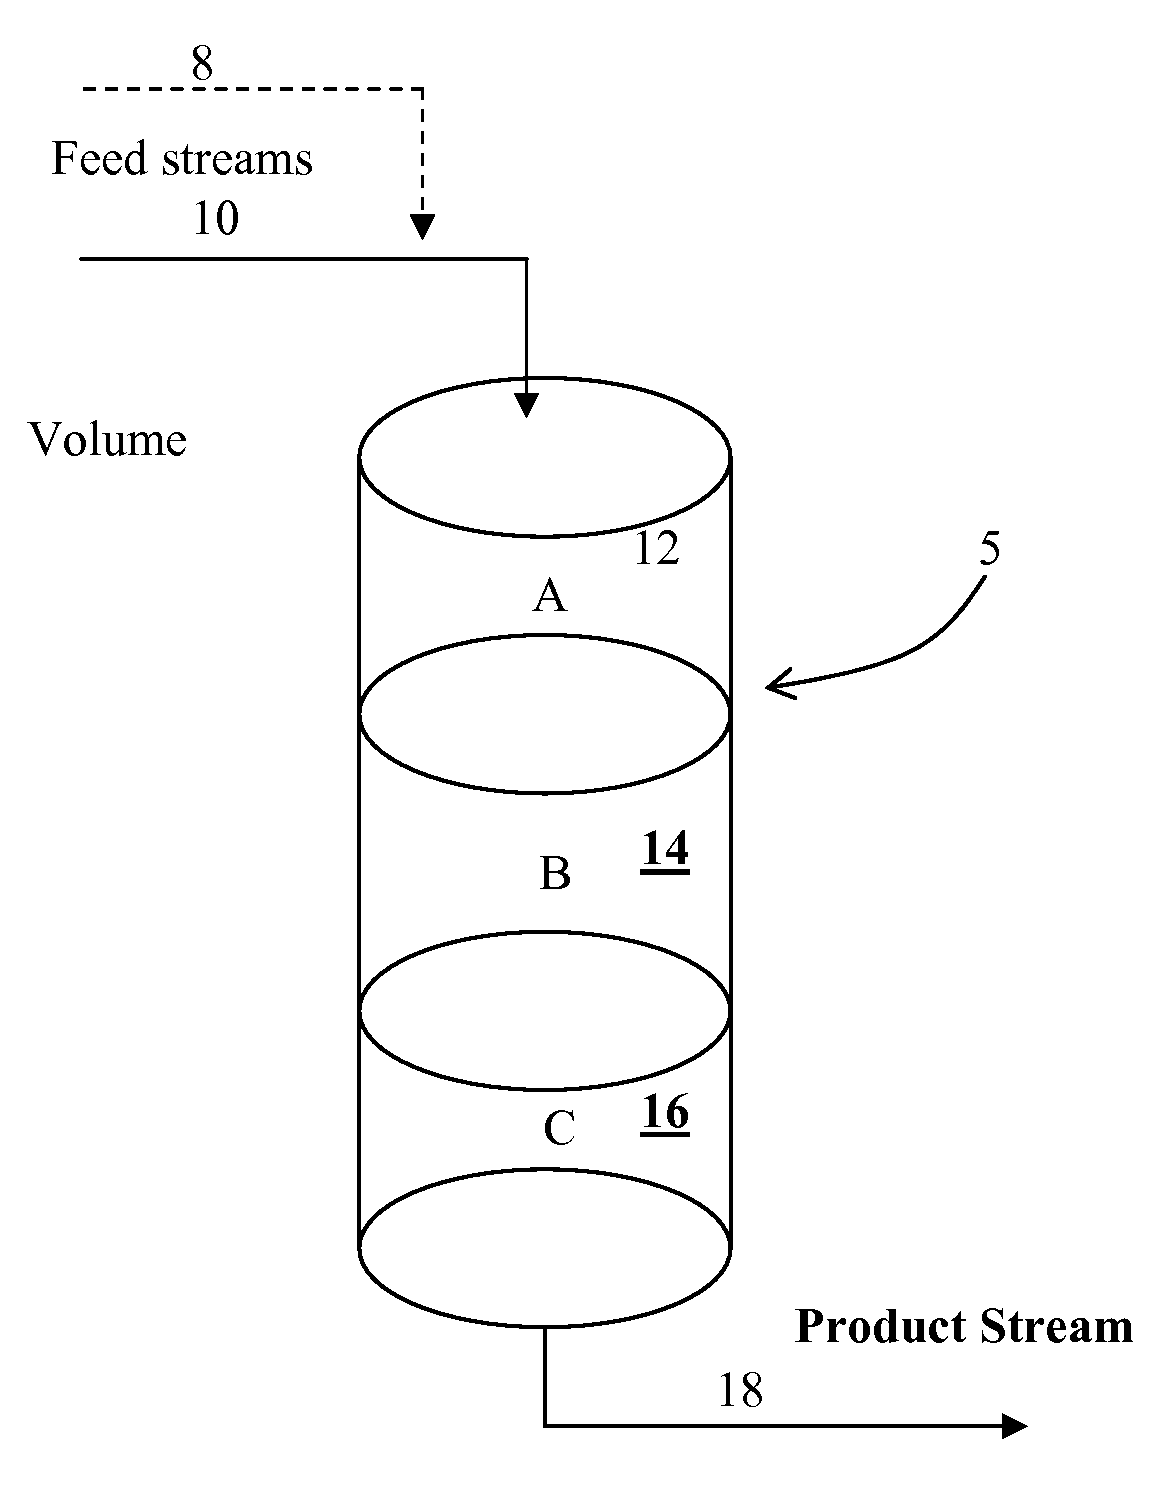 Graded Catalyst Bed for Methyl Mercaptan Synthesis